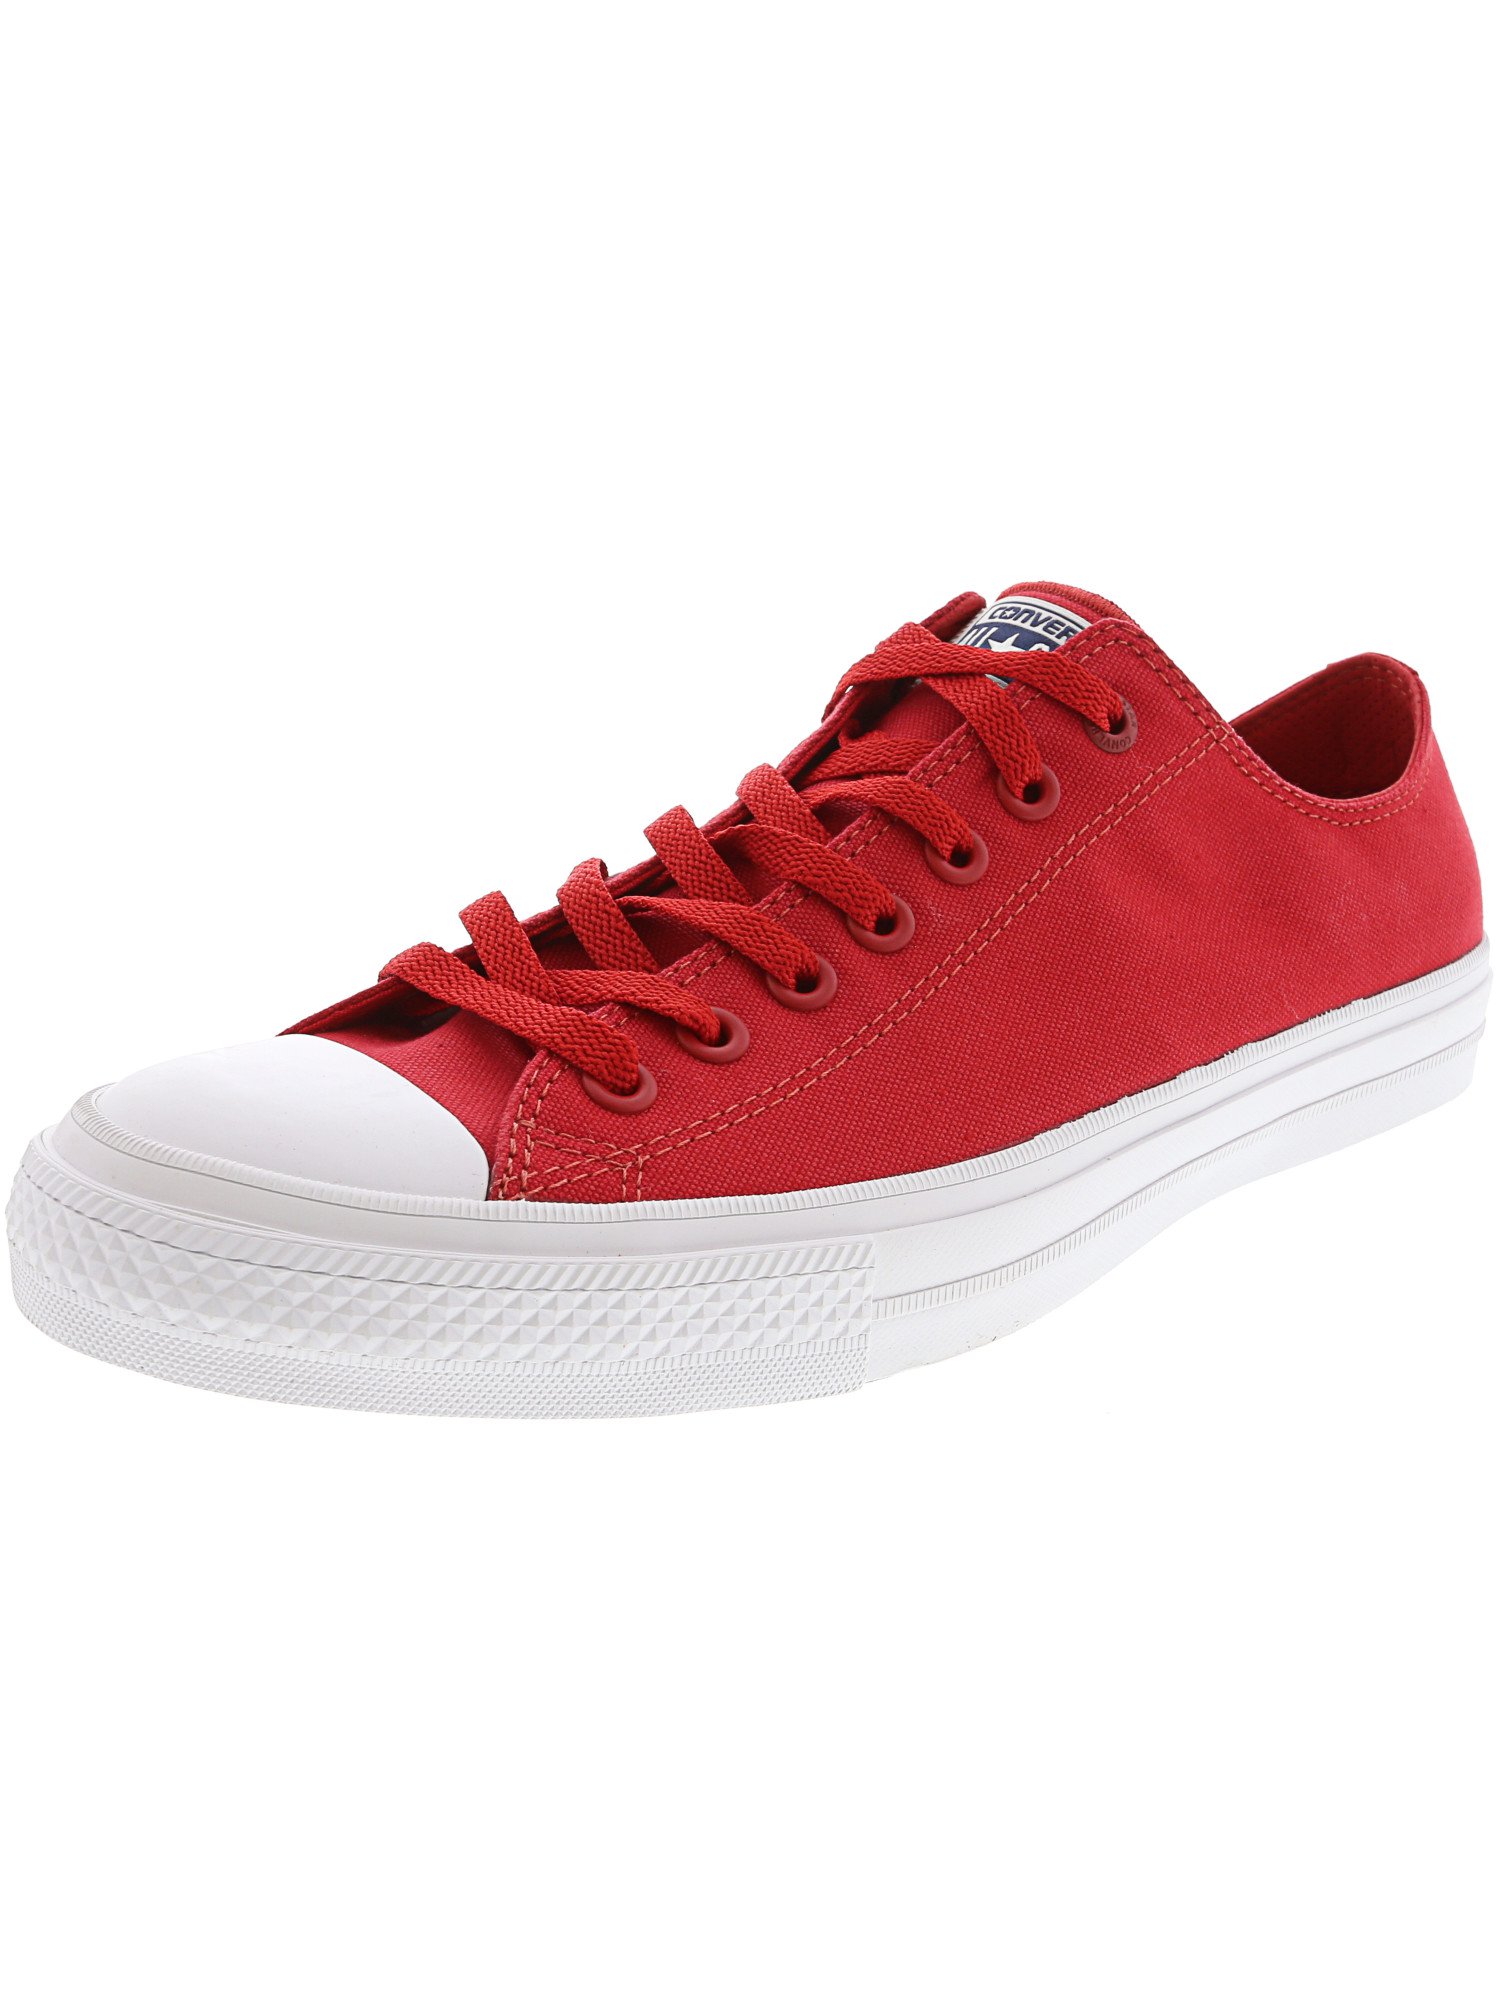 Converse Chuck Taylor All Star Ox Salsa Red / White Ankle-High Fashion  Sneaker   